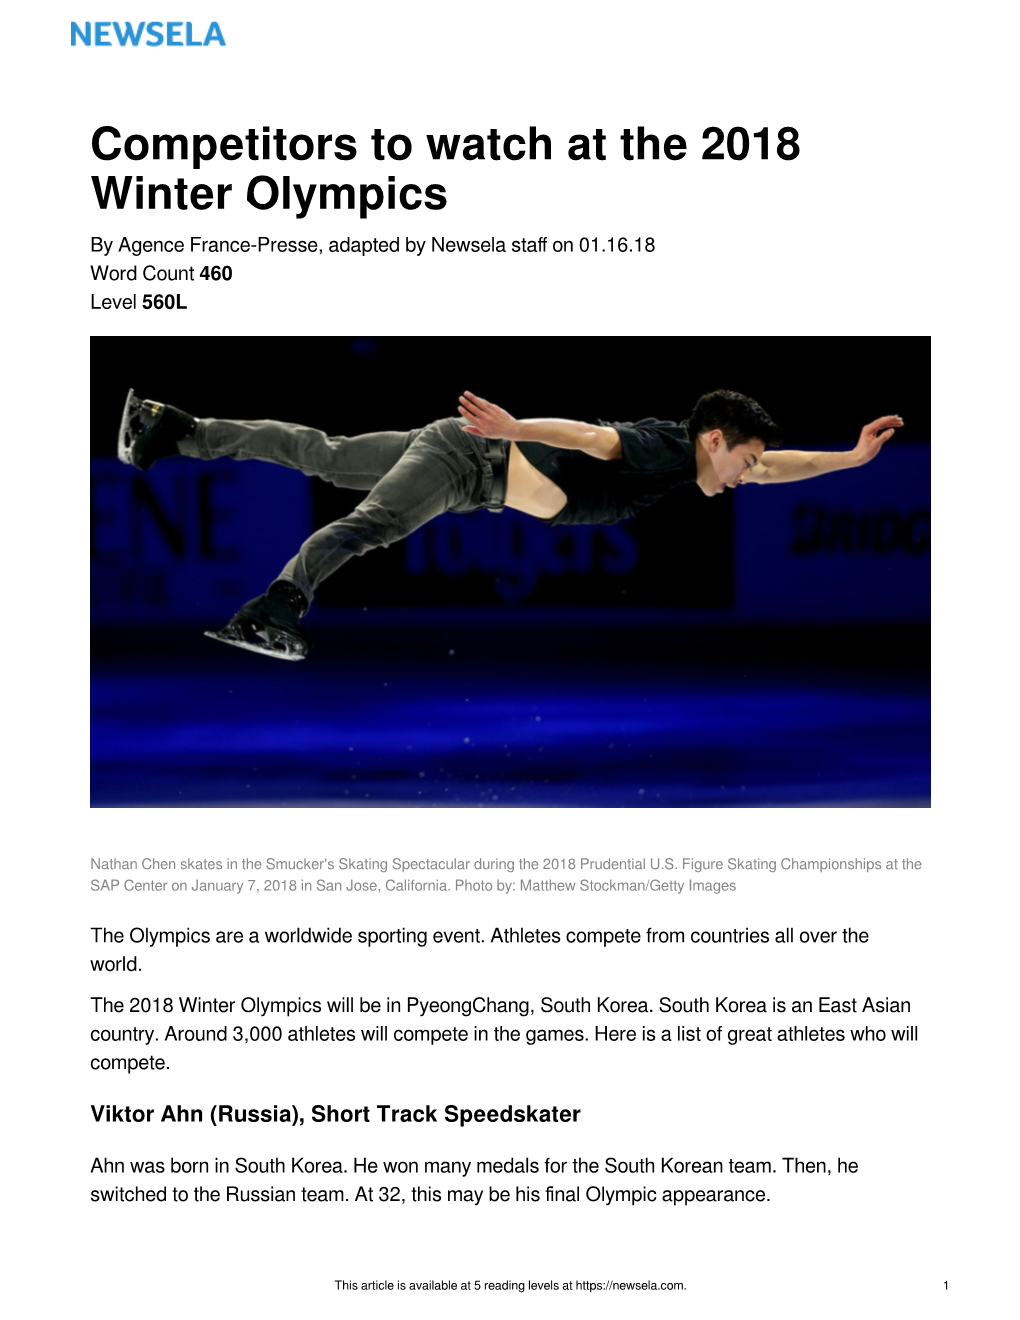 Competitors to Watch at the 2018 Winter Olympics by Agence France-Presse, Adapted by Newsela Staﬀ on 01.16.18 Word Count 460 Level 560L